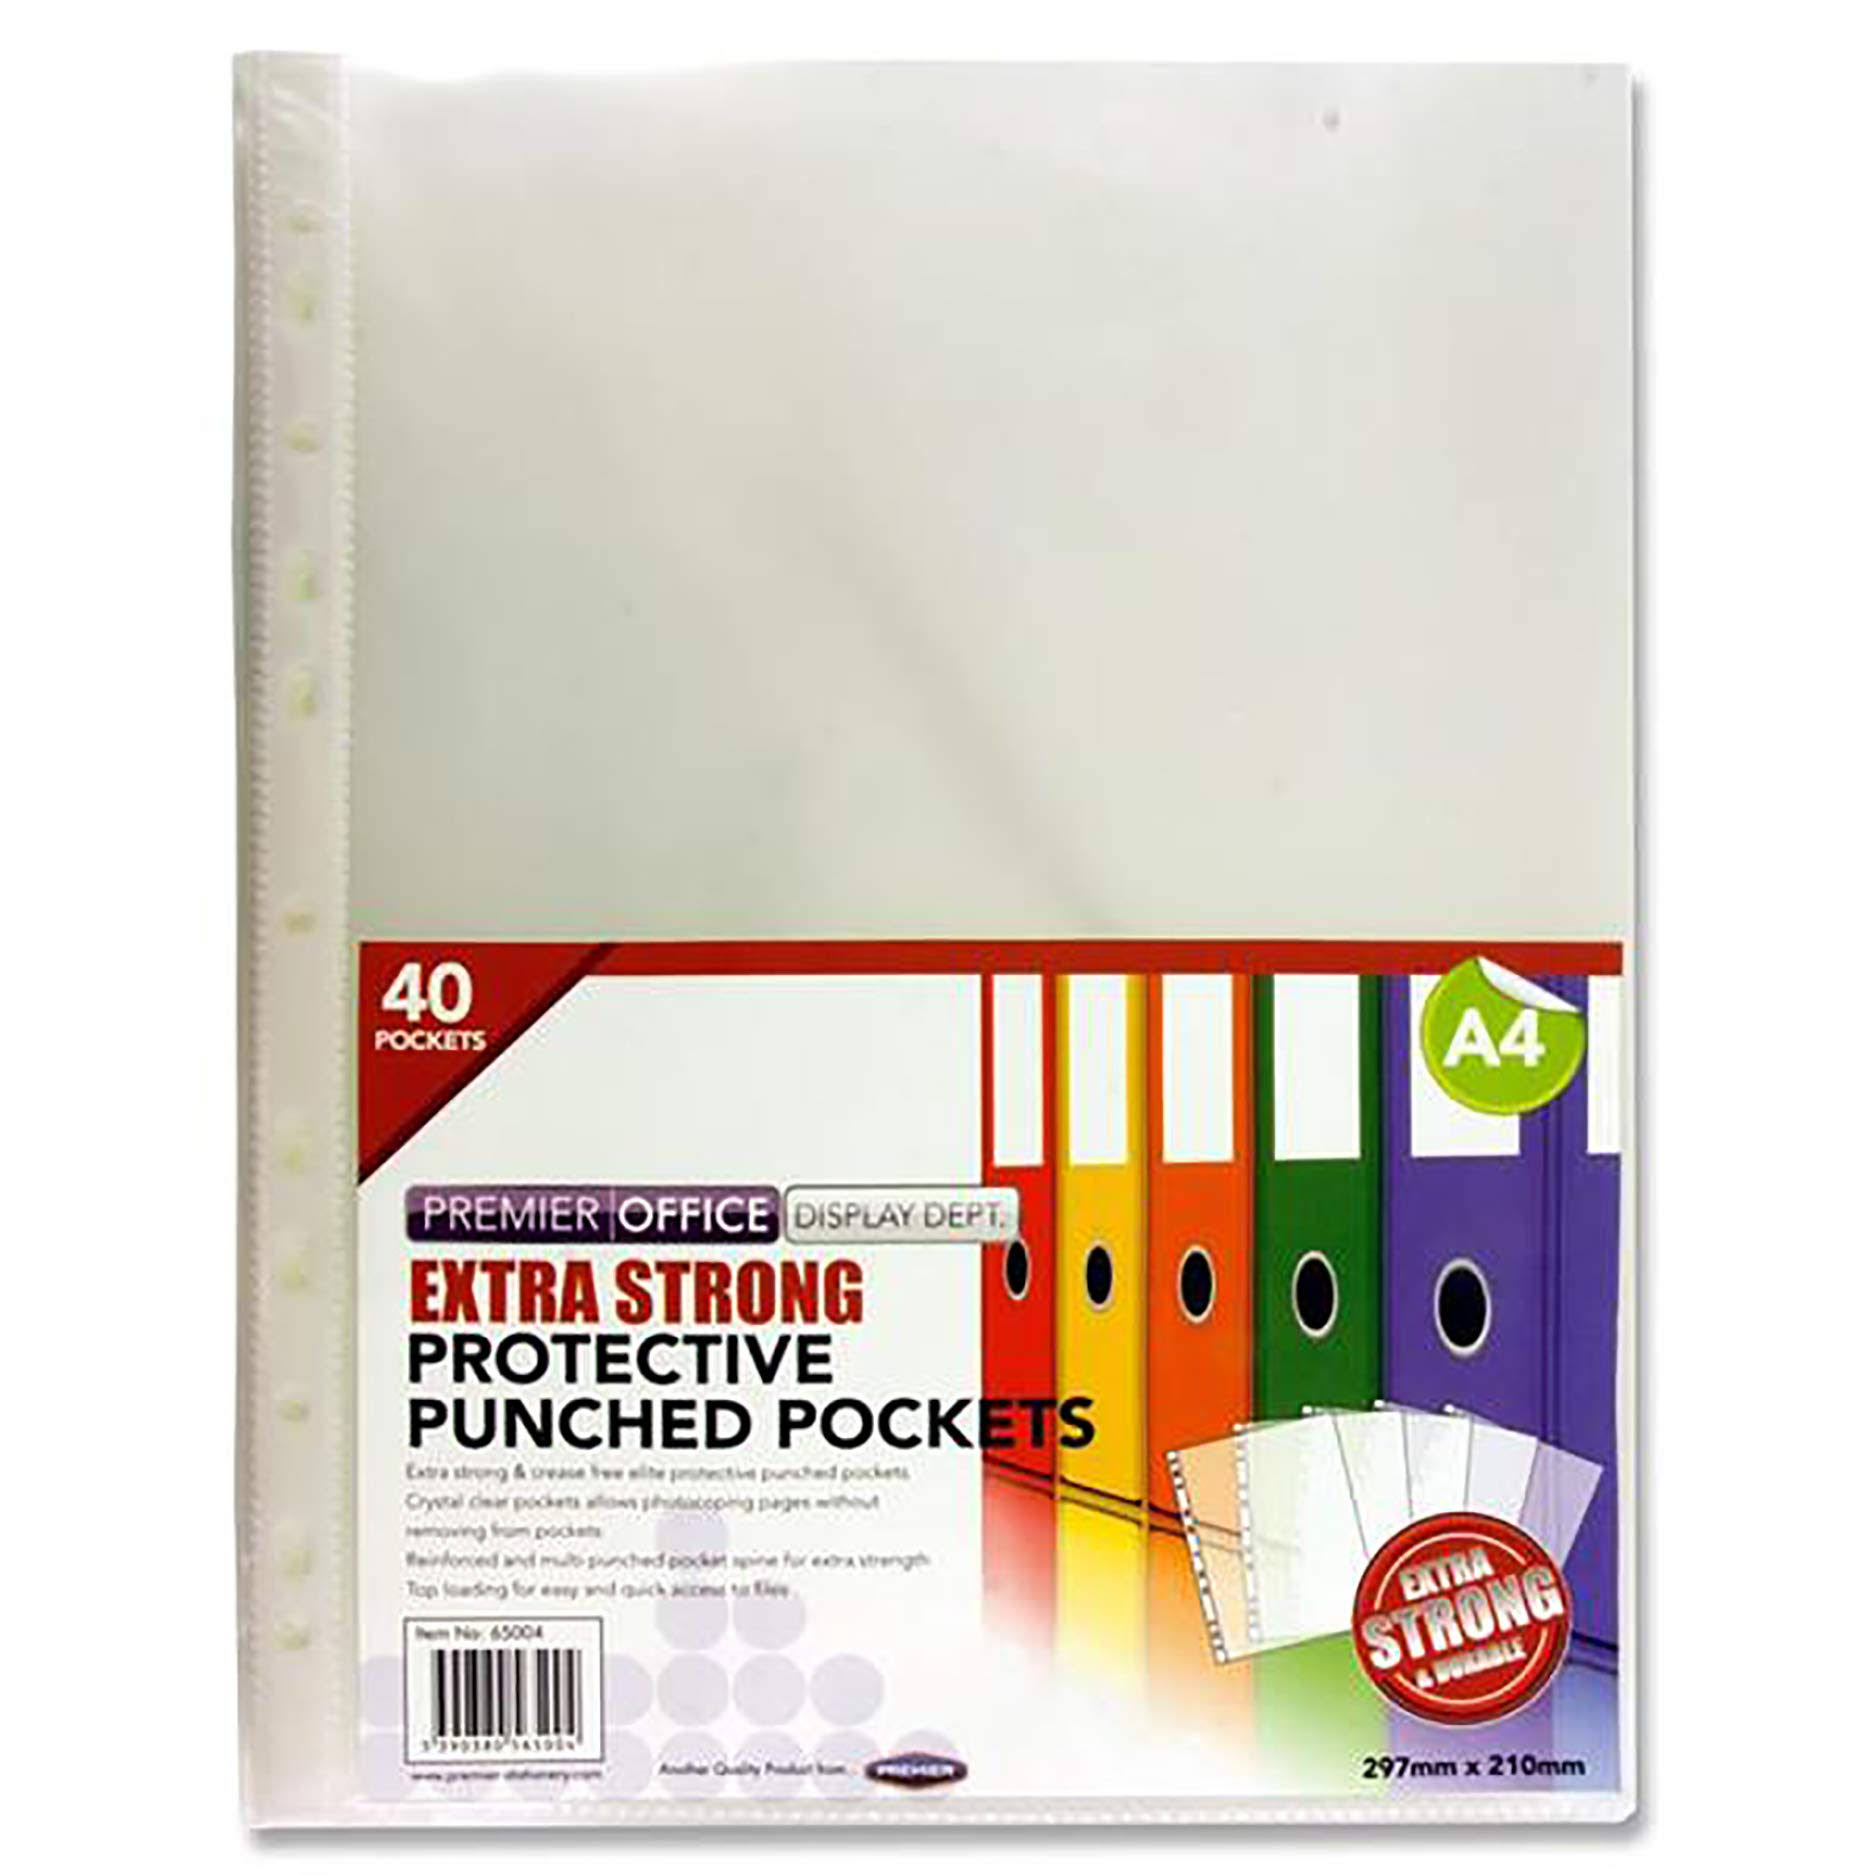 Premier Office Pkt.40 A4 Extra Strong Punched Pockets H2765004